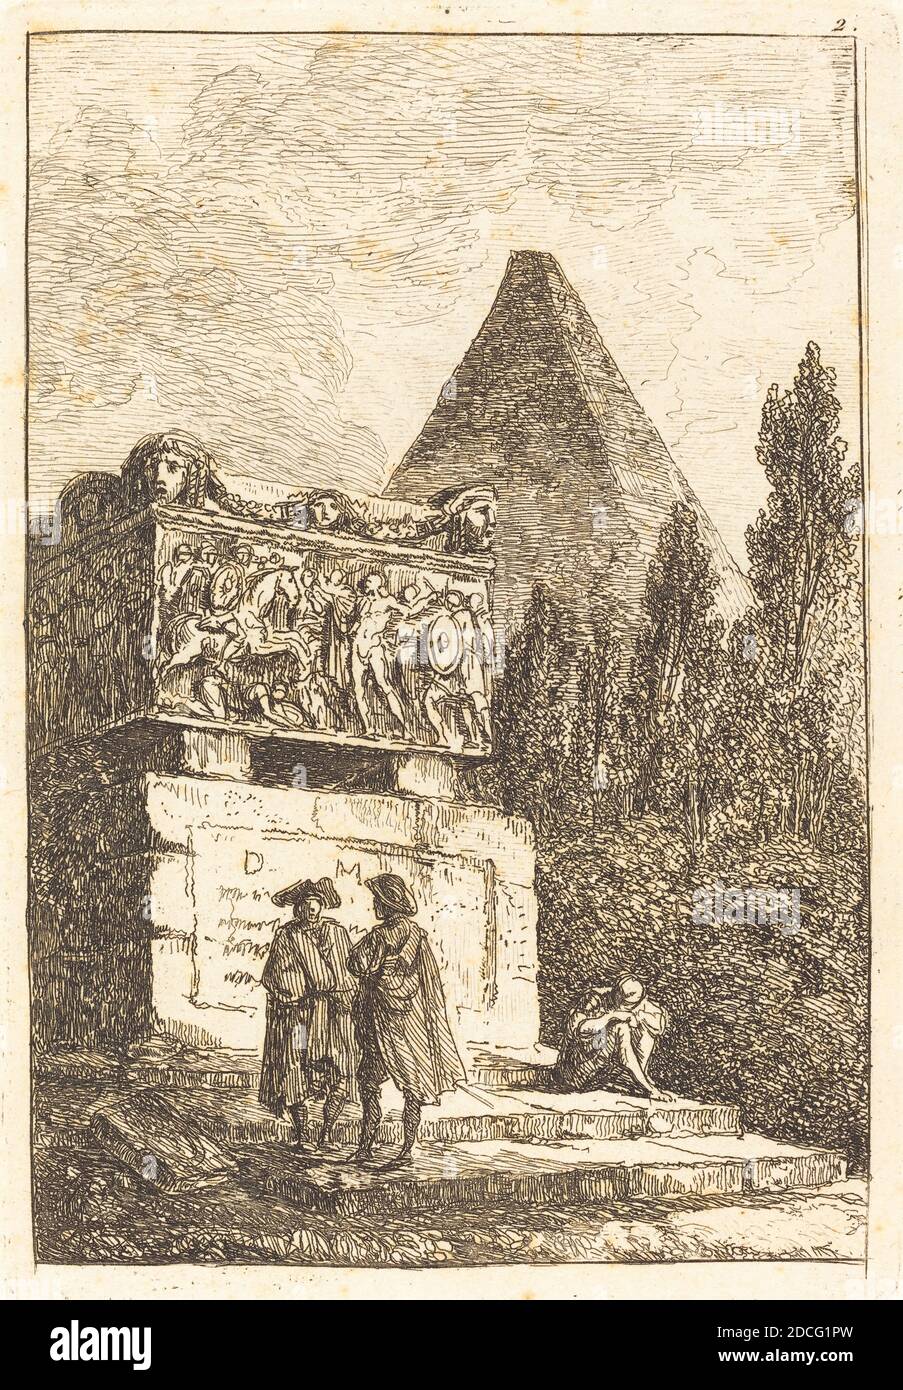 Hubert Robert, (artist), French, 1733 - 1808, The Sarcophagus, Les Soirees de Rome (Evenings in Rome):pl.2, (series), etching Stock Photo